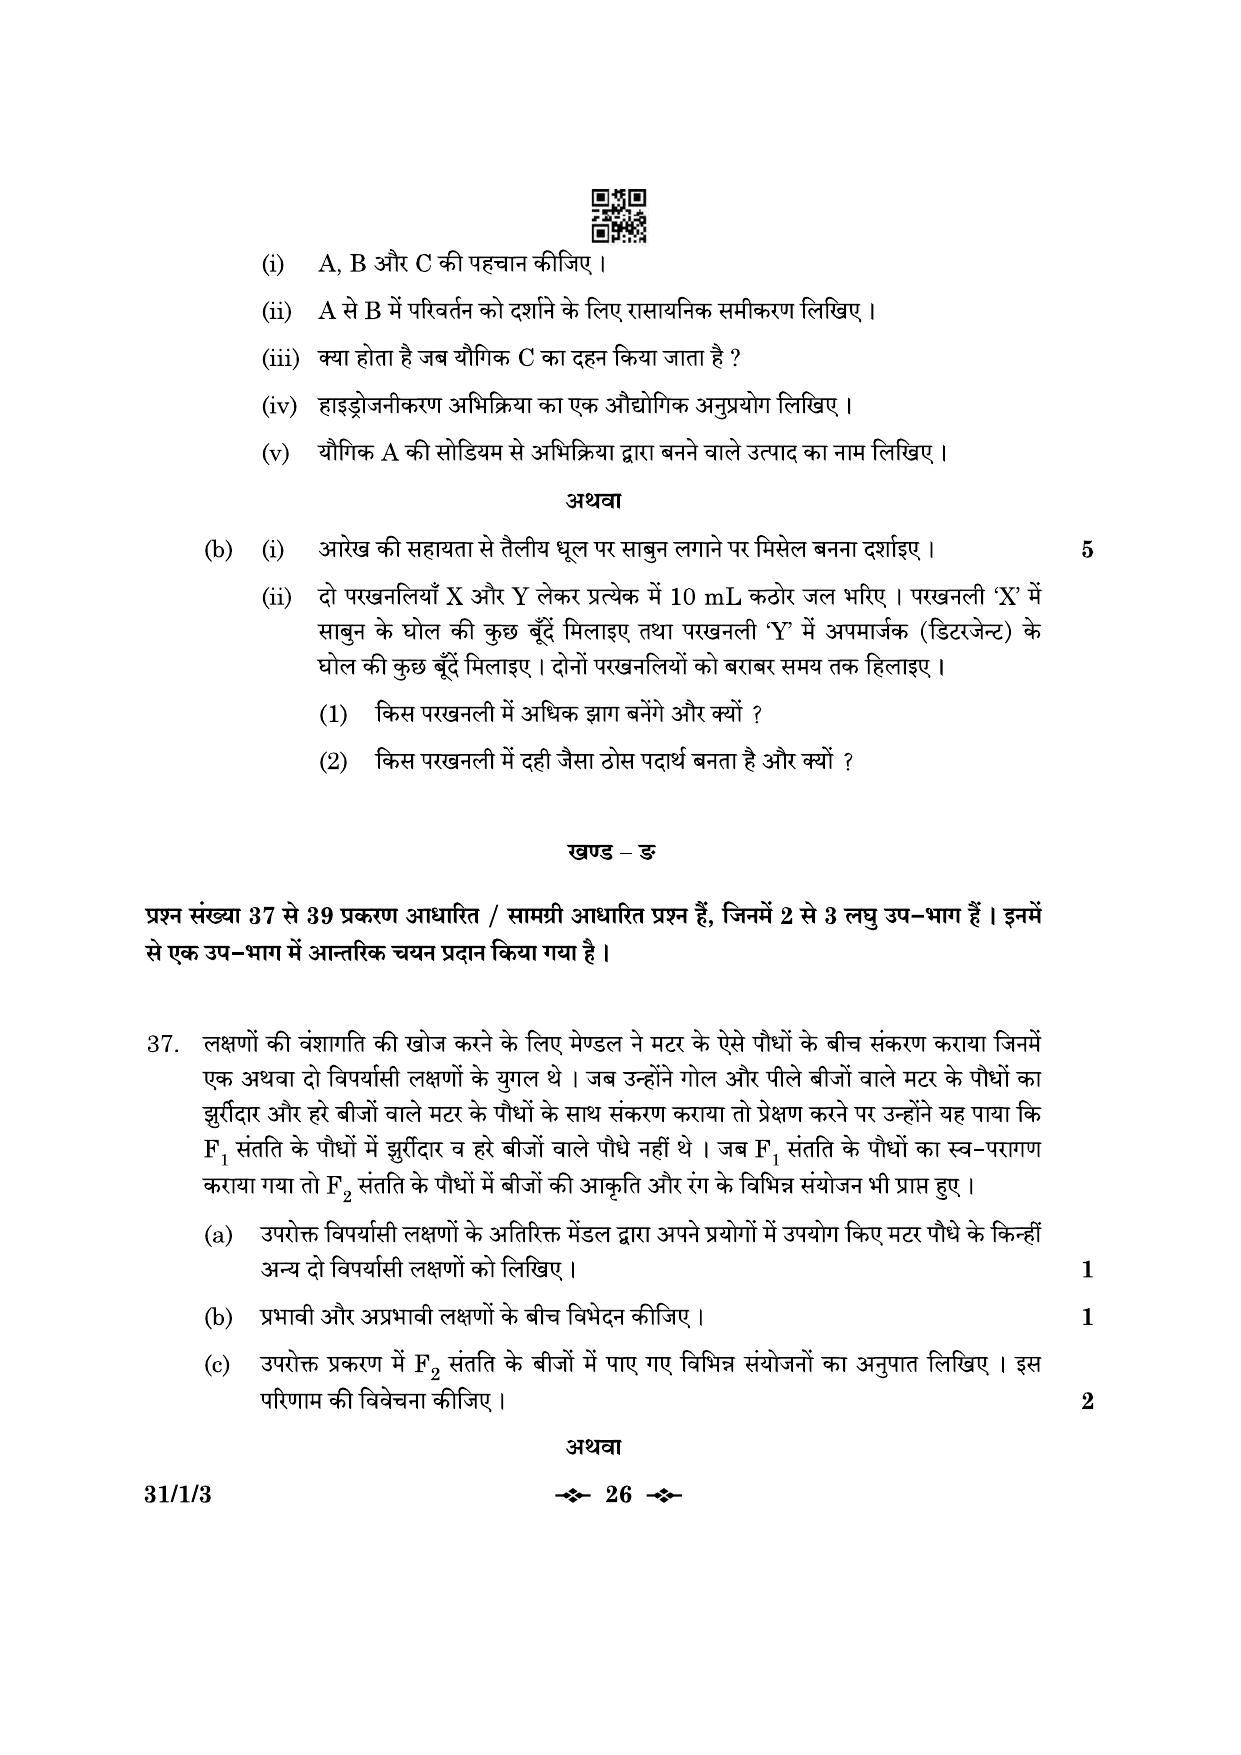 CBSE Class 10 31-1-3 Science 2023 Question Paper - Page 26